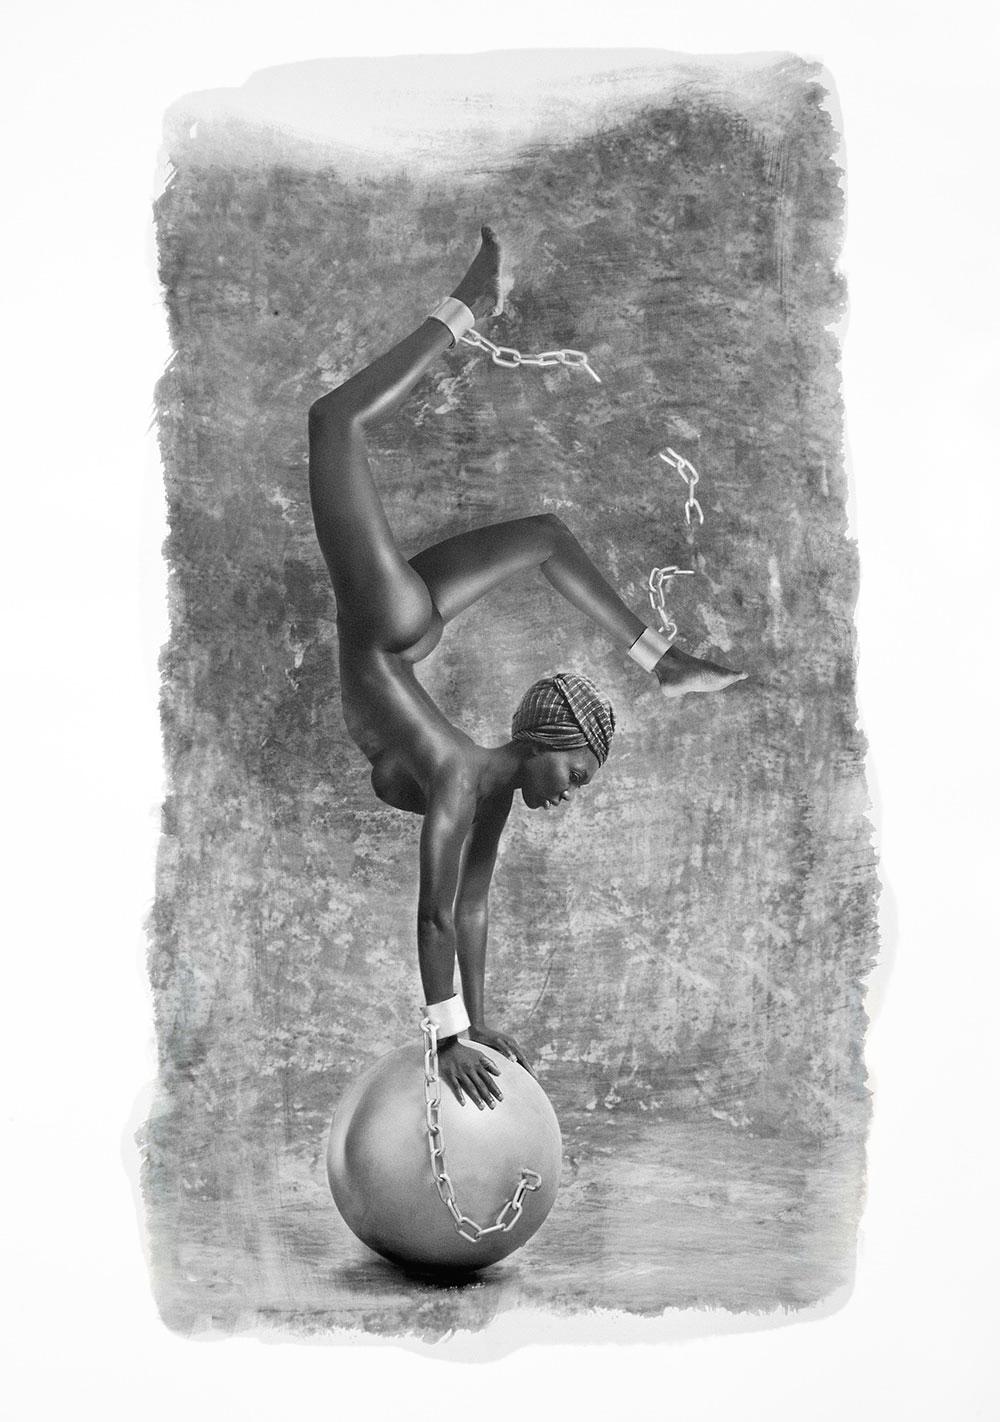 Uwe Ommer Black and White Photograph - Les Acrobates VI.  Limited edition Photograph